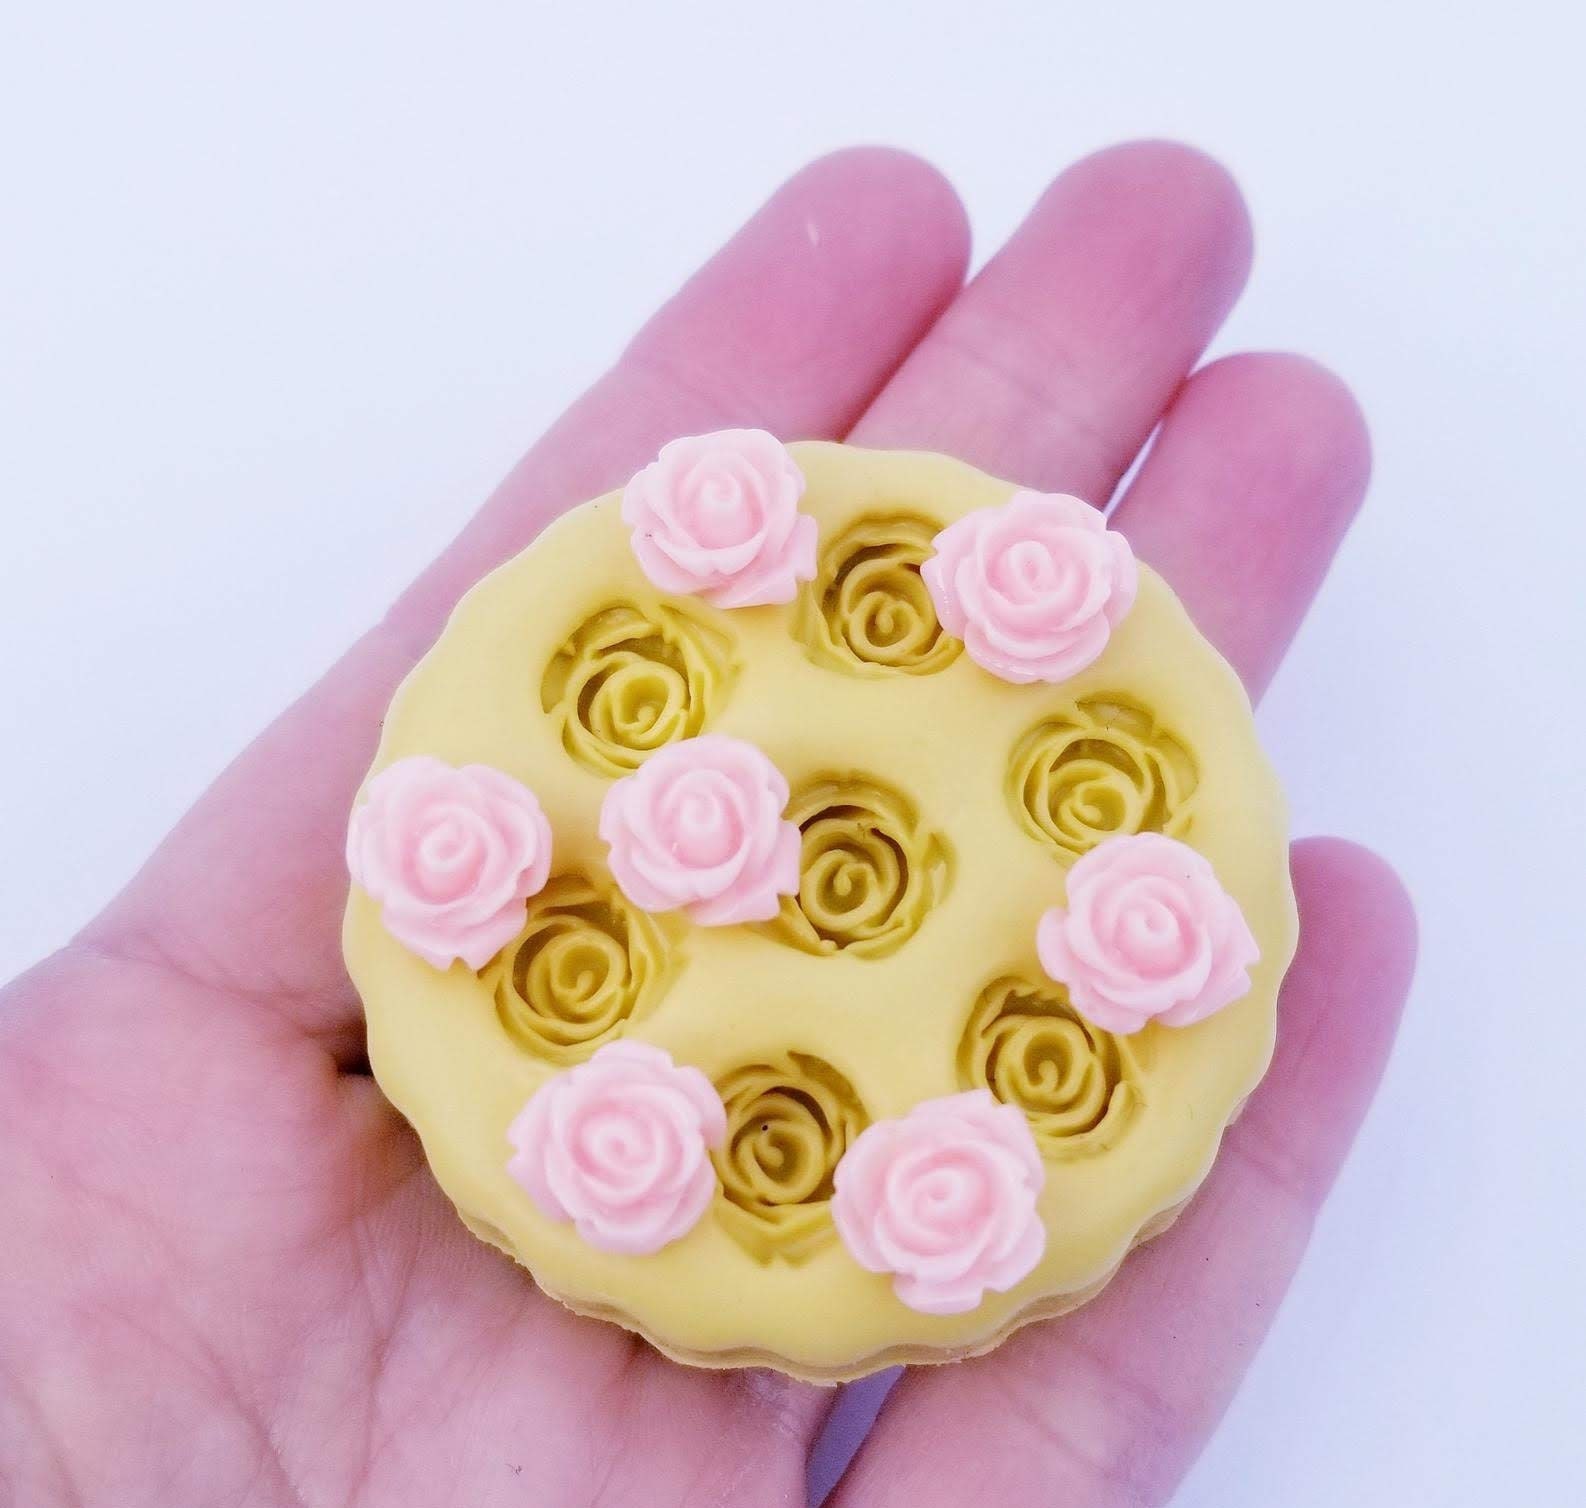 FVVMEED Rose Flowers Shape Silicone Molds 6 Cavity Mousse Cake Mold Cakes  Non-Stick 3D Baking Pan Dessert Cheesecake Bakeware Mould For DIY Pastry